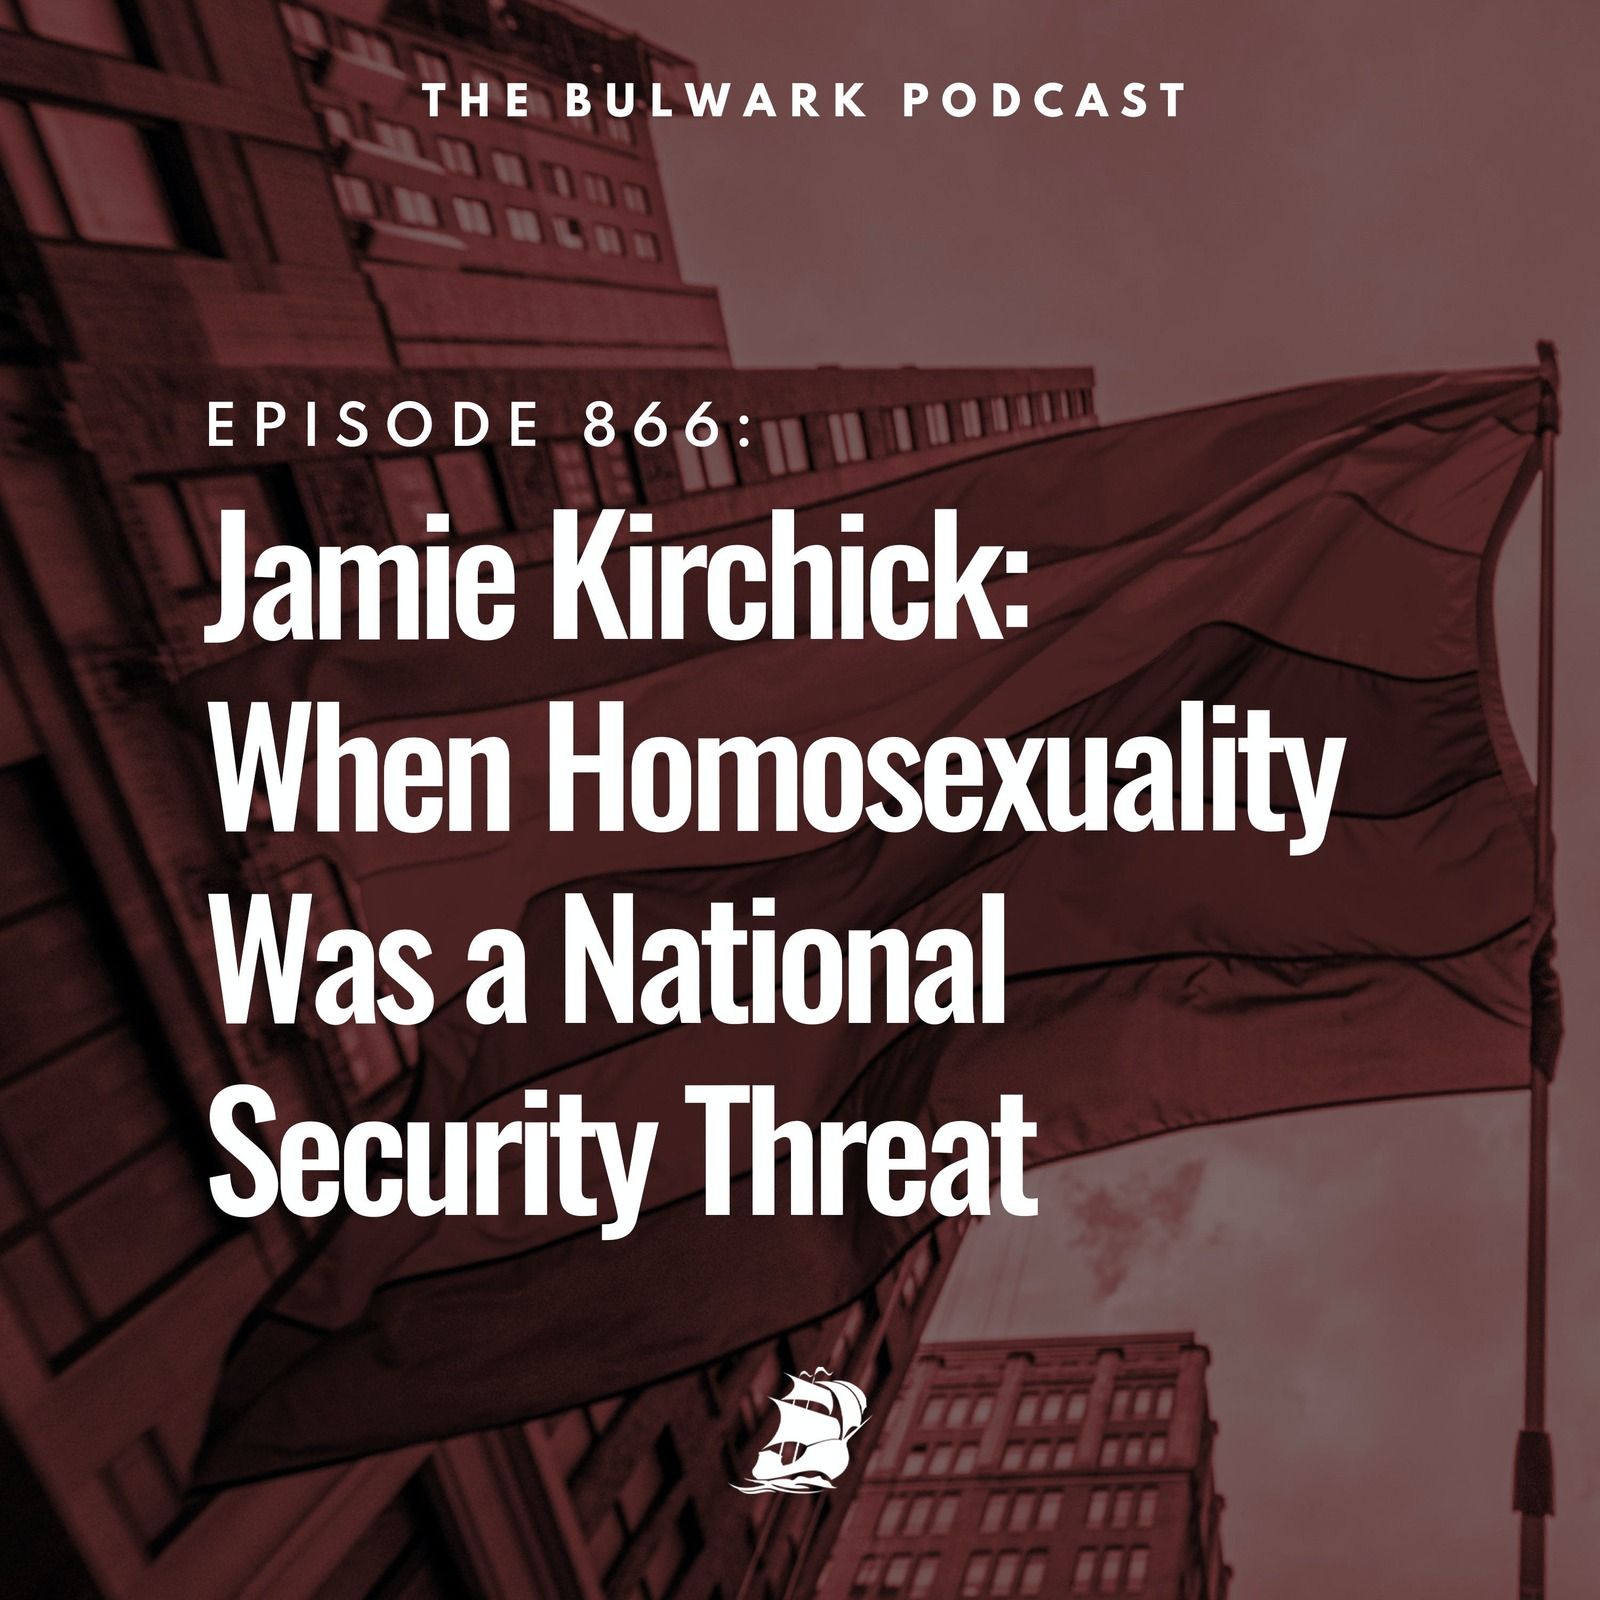 Jamie Kirchick: When Homosexuality Was a National Security Threat by The Bulwark Podcast